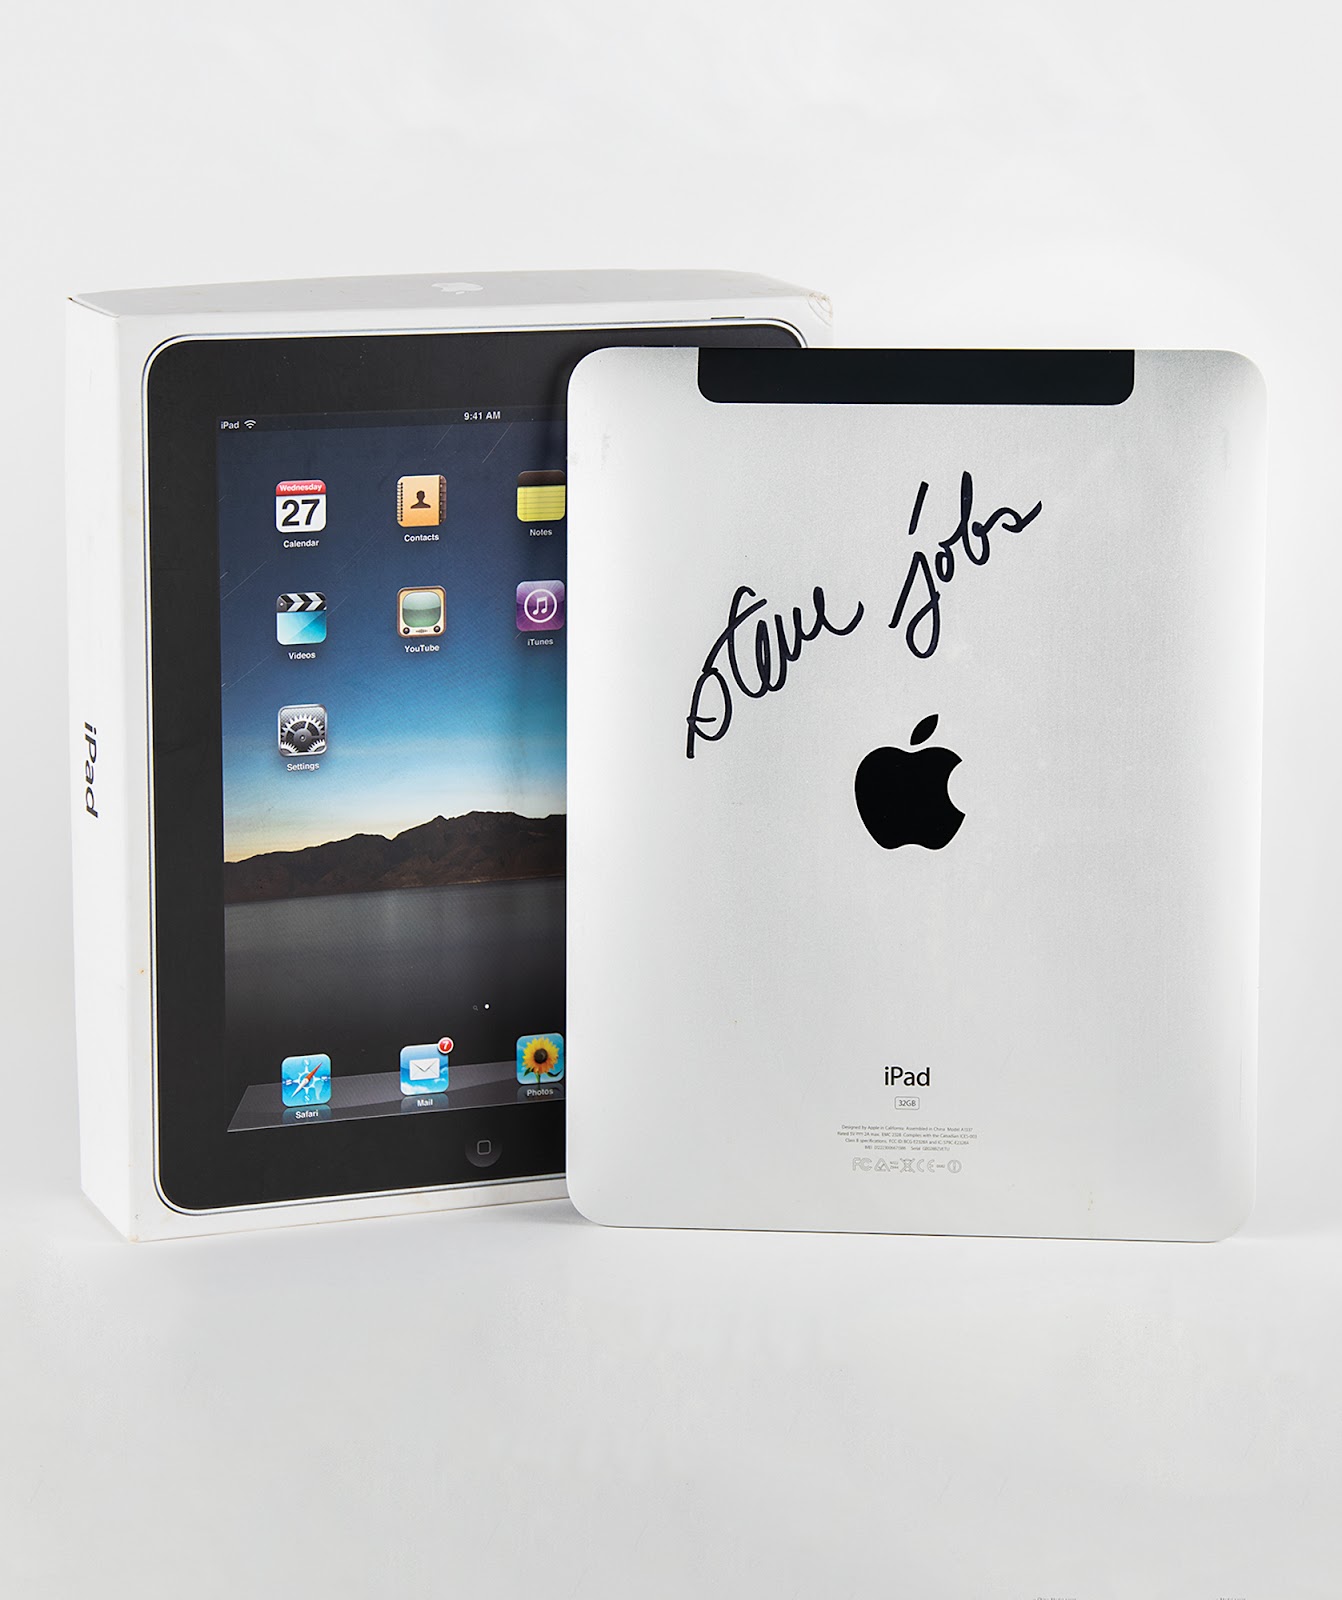 The iPad boldly signed by Steve Jobs pictured with its original packaging.